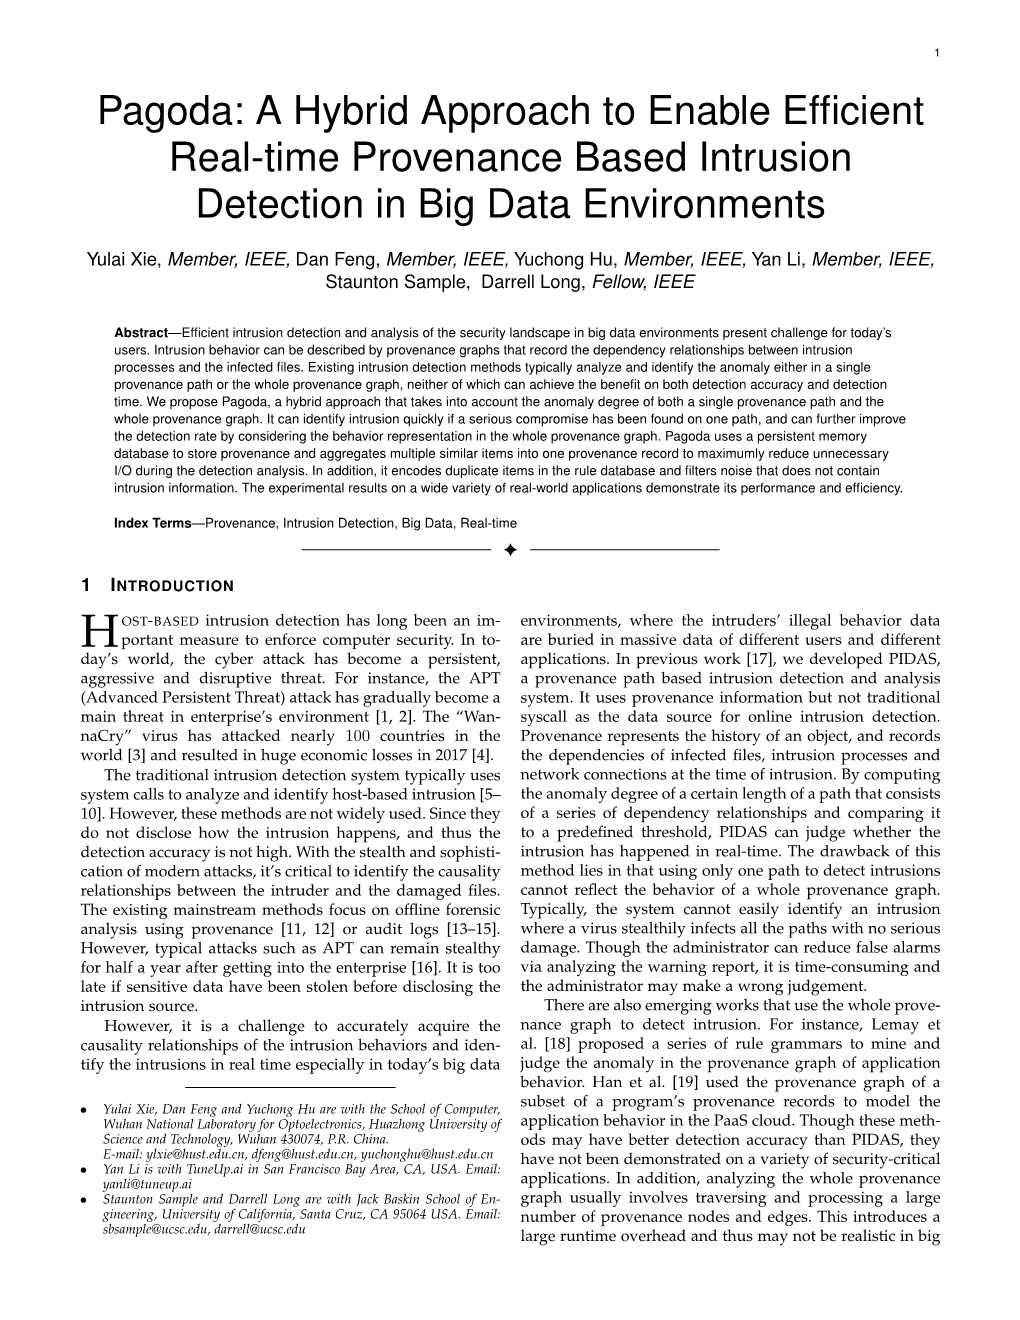 Pagoda: a Hybrid Approach to Enable Efﬁcient Real-Time Provenance Based Intrusion Detection in Big Data Environments